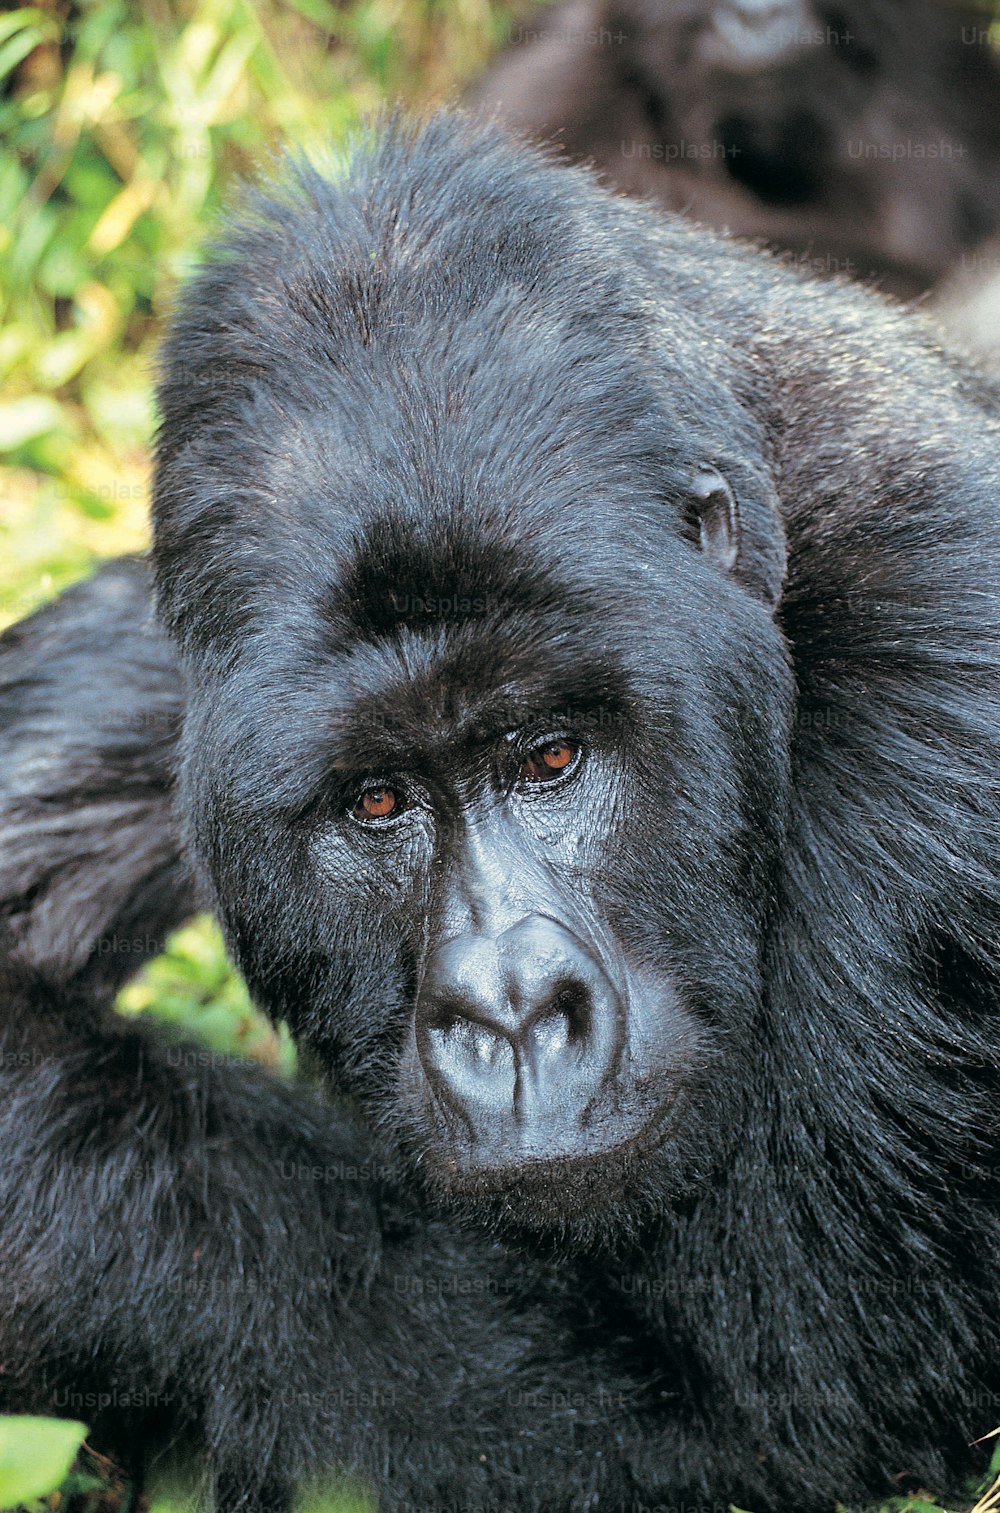 a close up of a gorilla laying on the ground